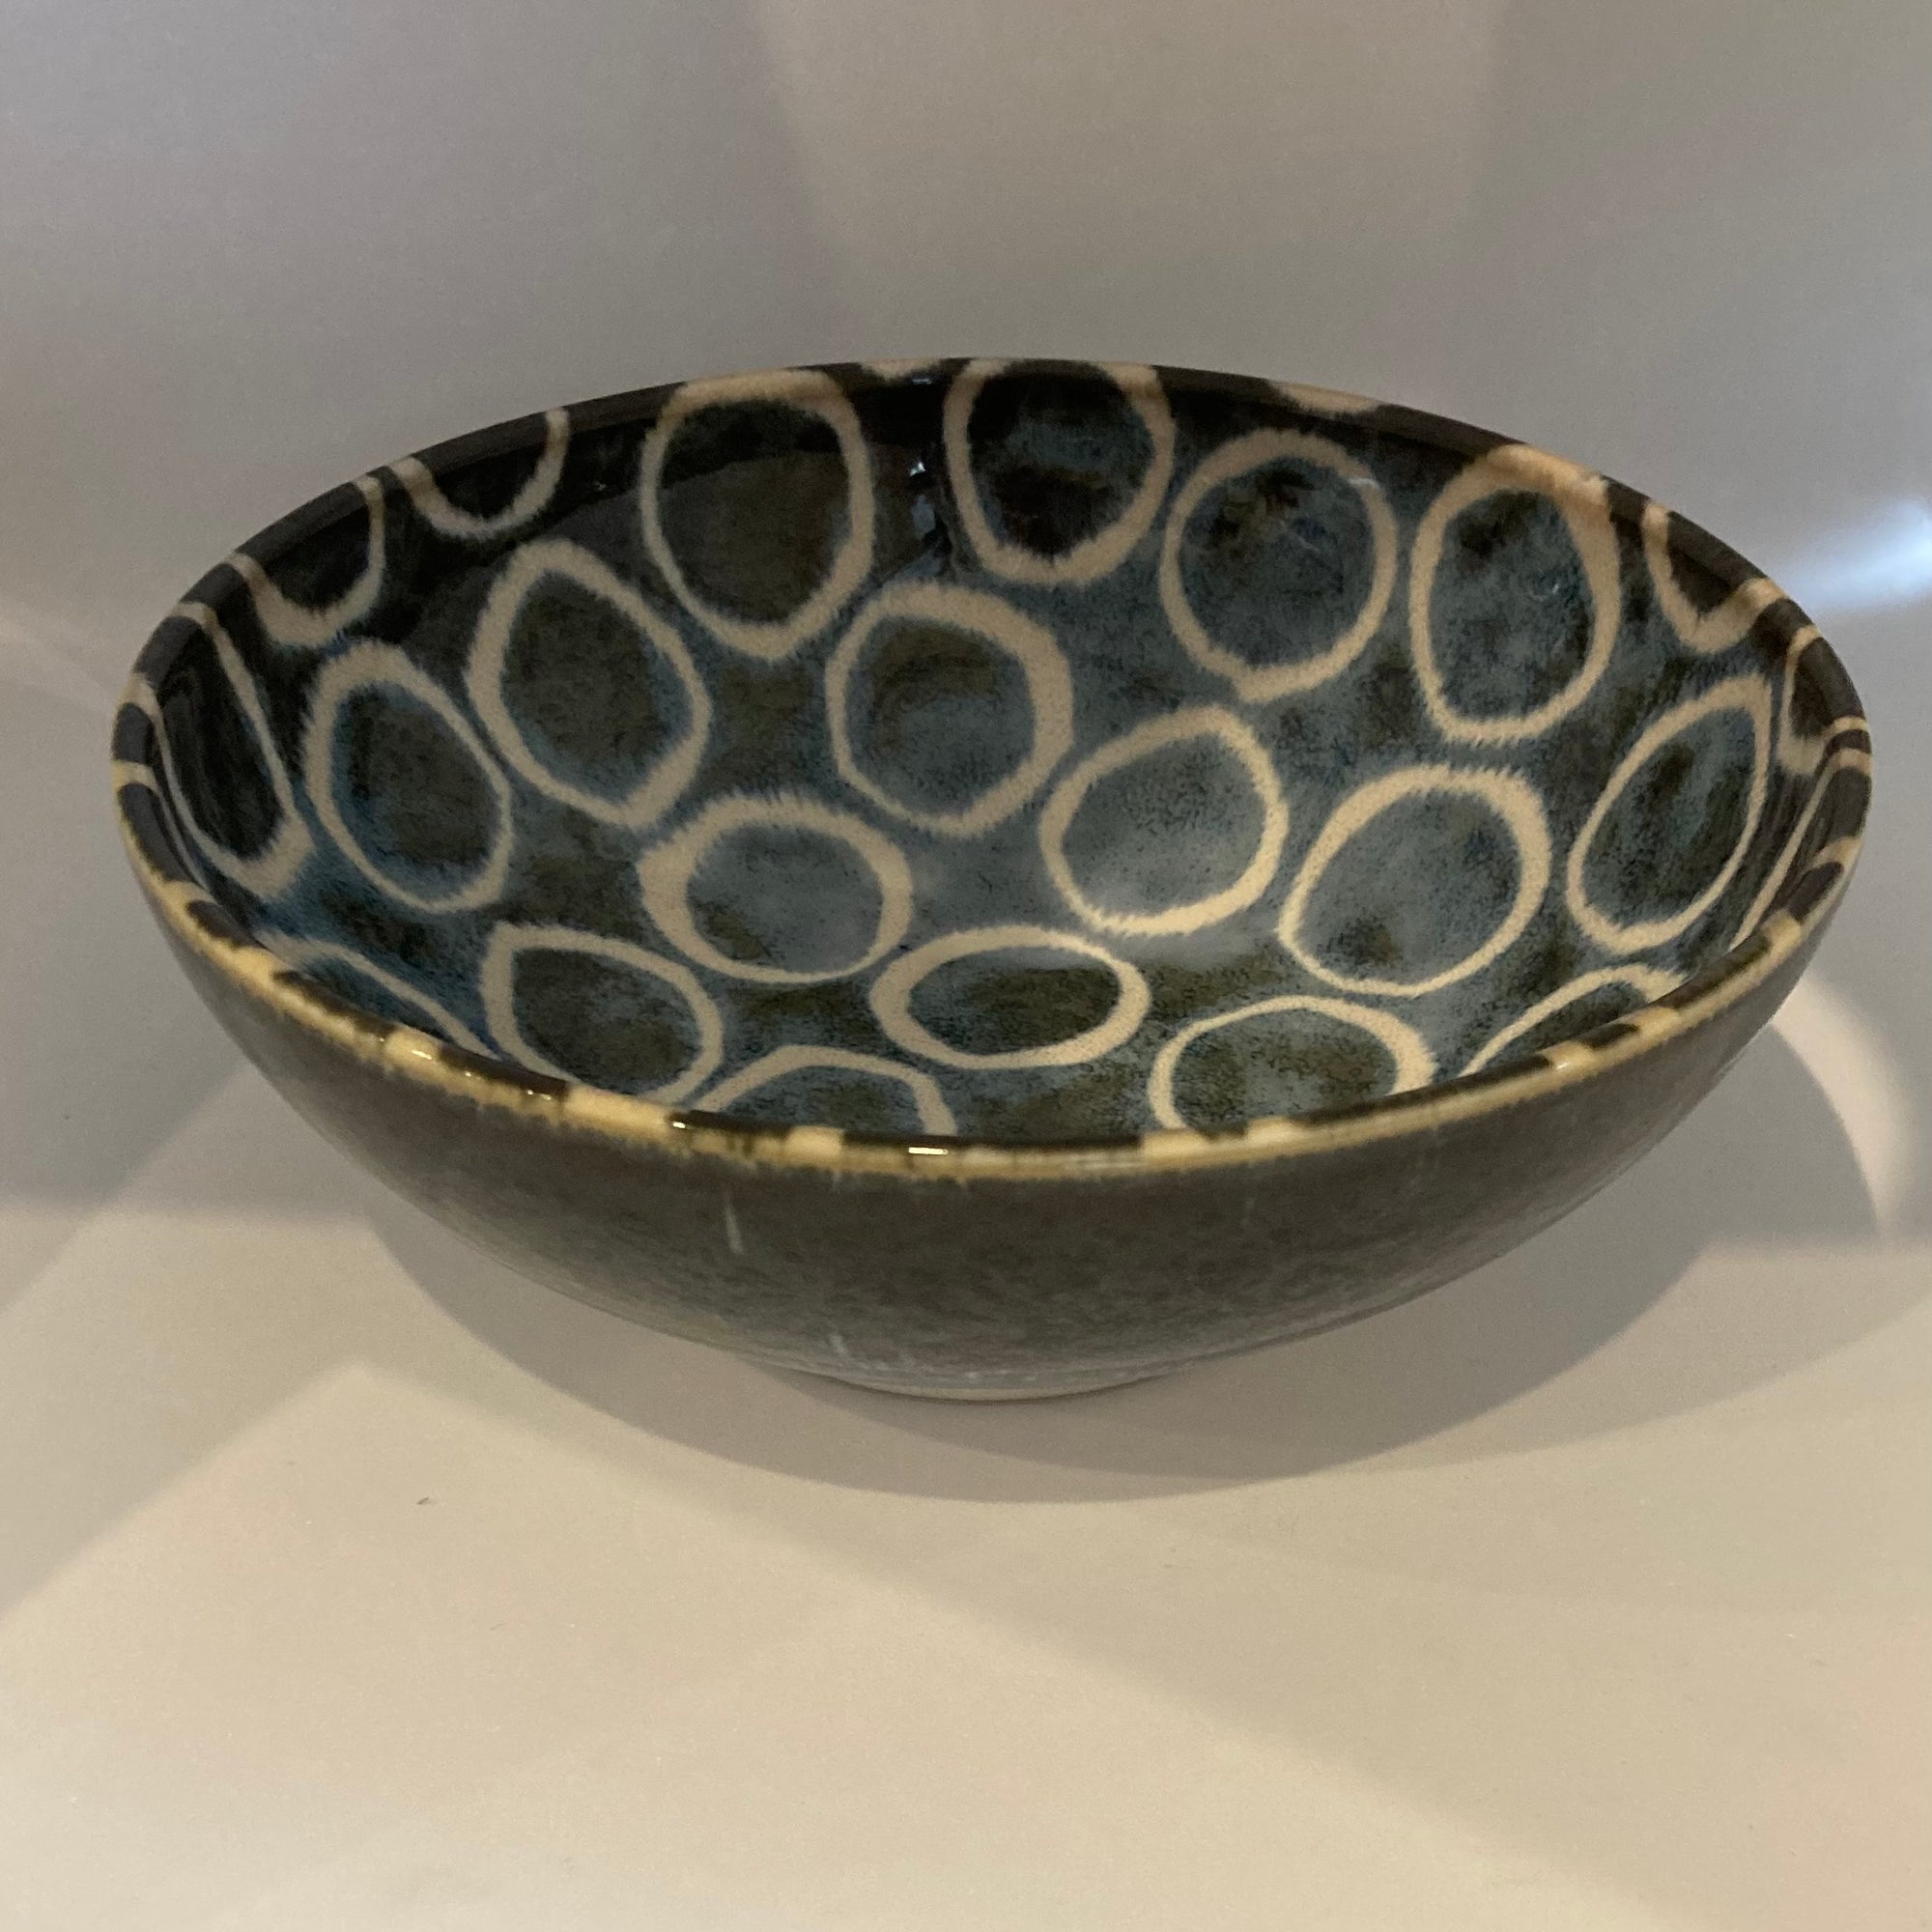 Jacob Little-Dulwich Hill-Momo Bowl-Japanese-Blue and Green Glaze